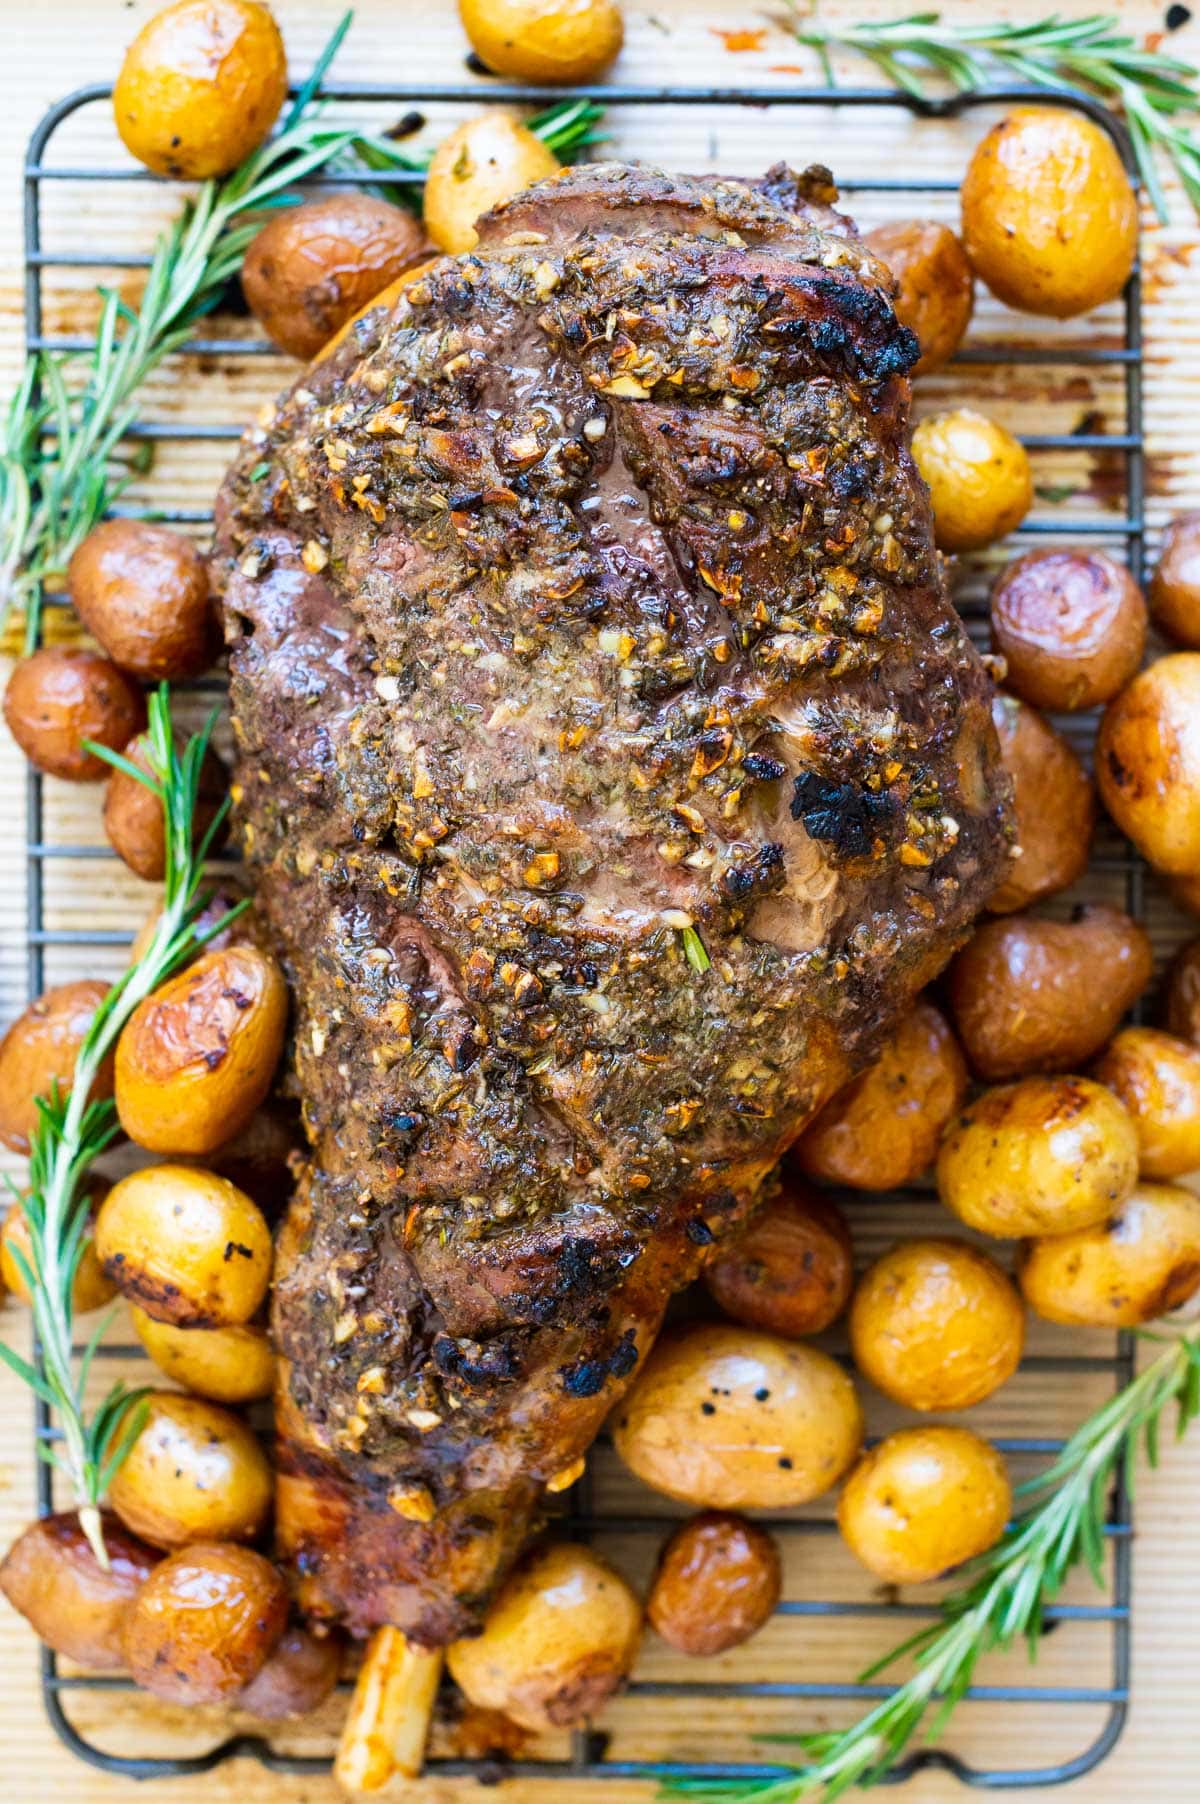 Roasted leg of lamb with baby potatoes and rosemary on a baking tray.